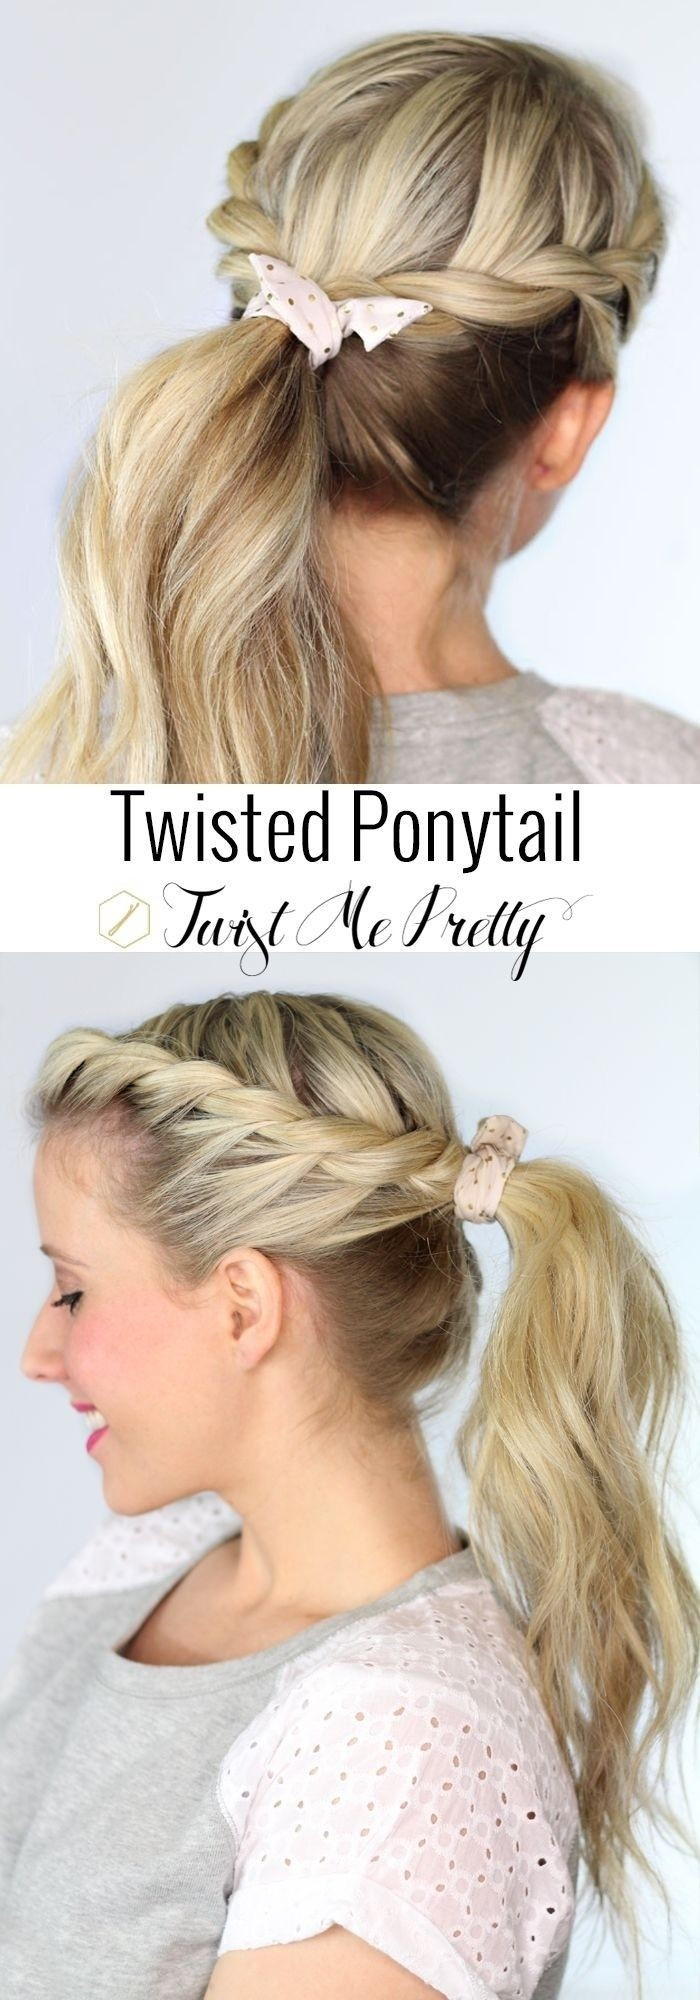 Easy Cute Hairstyles
 20 Ponytail Hairstyles Discover Latest Ponytail Ideas Now